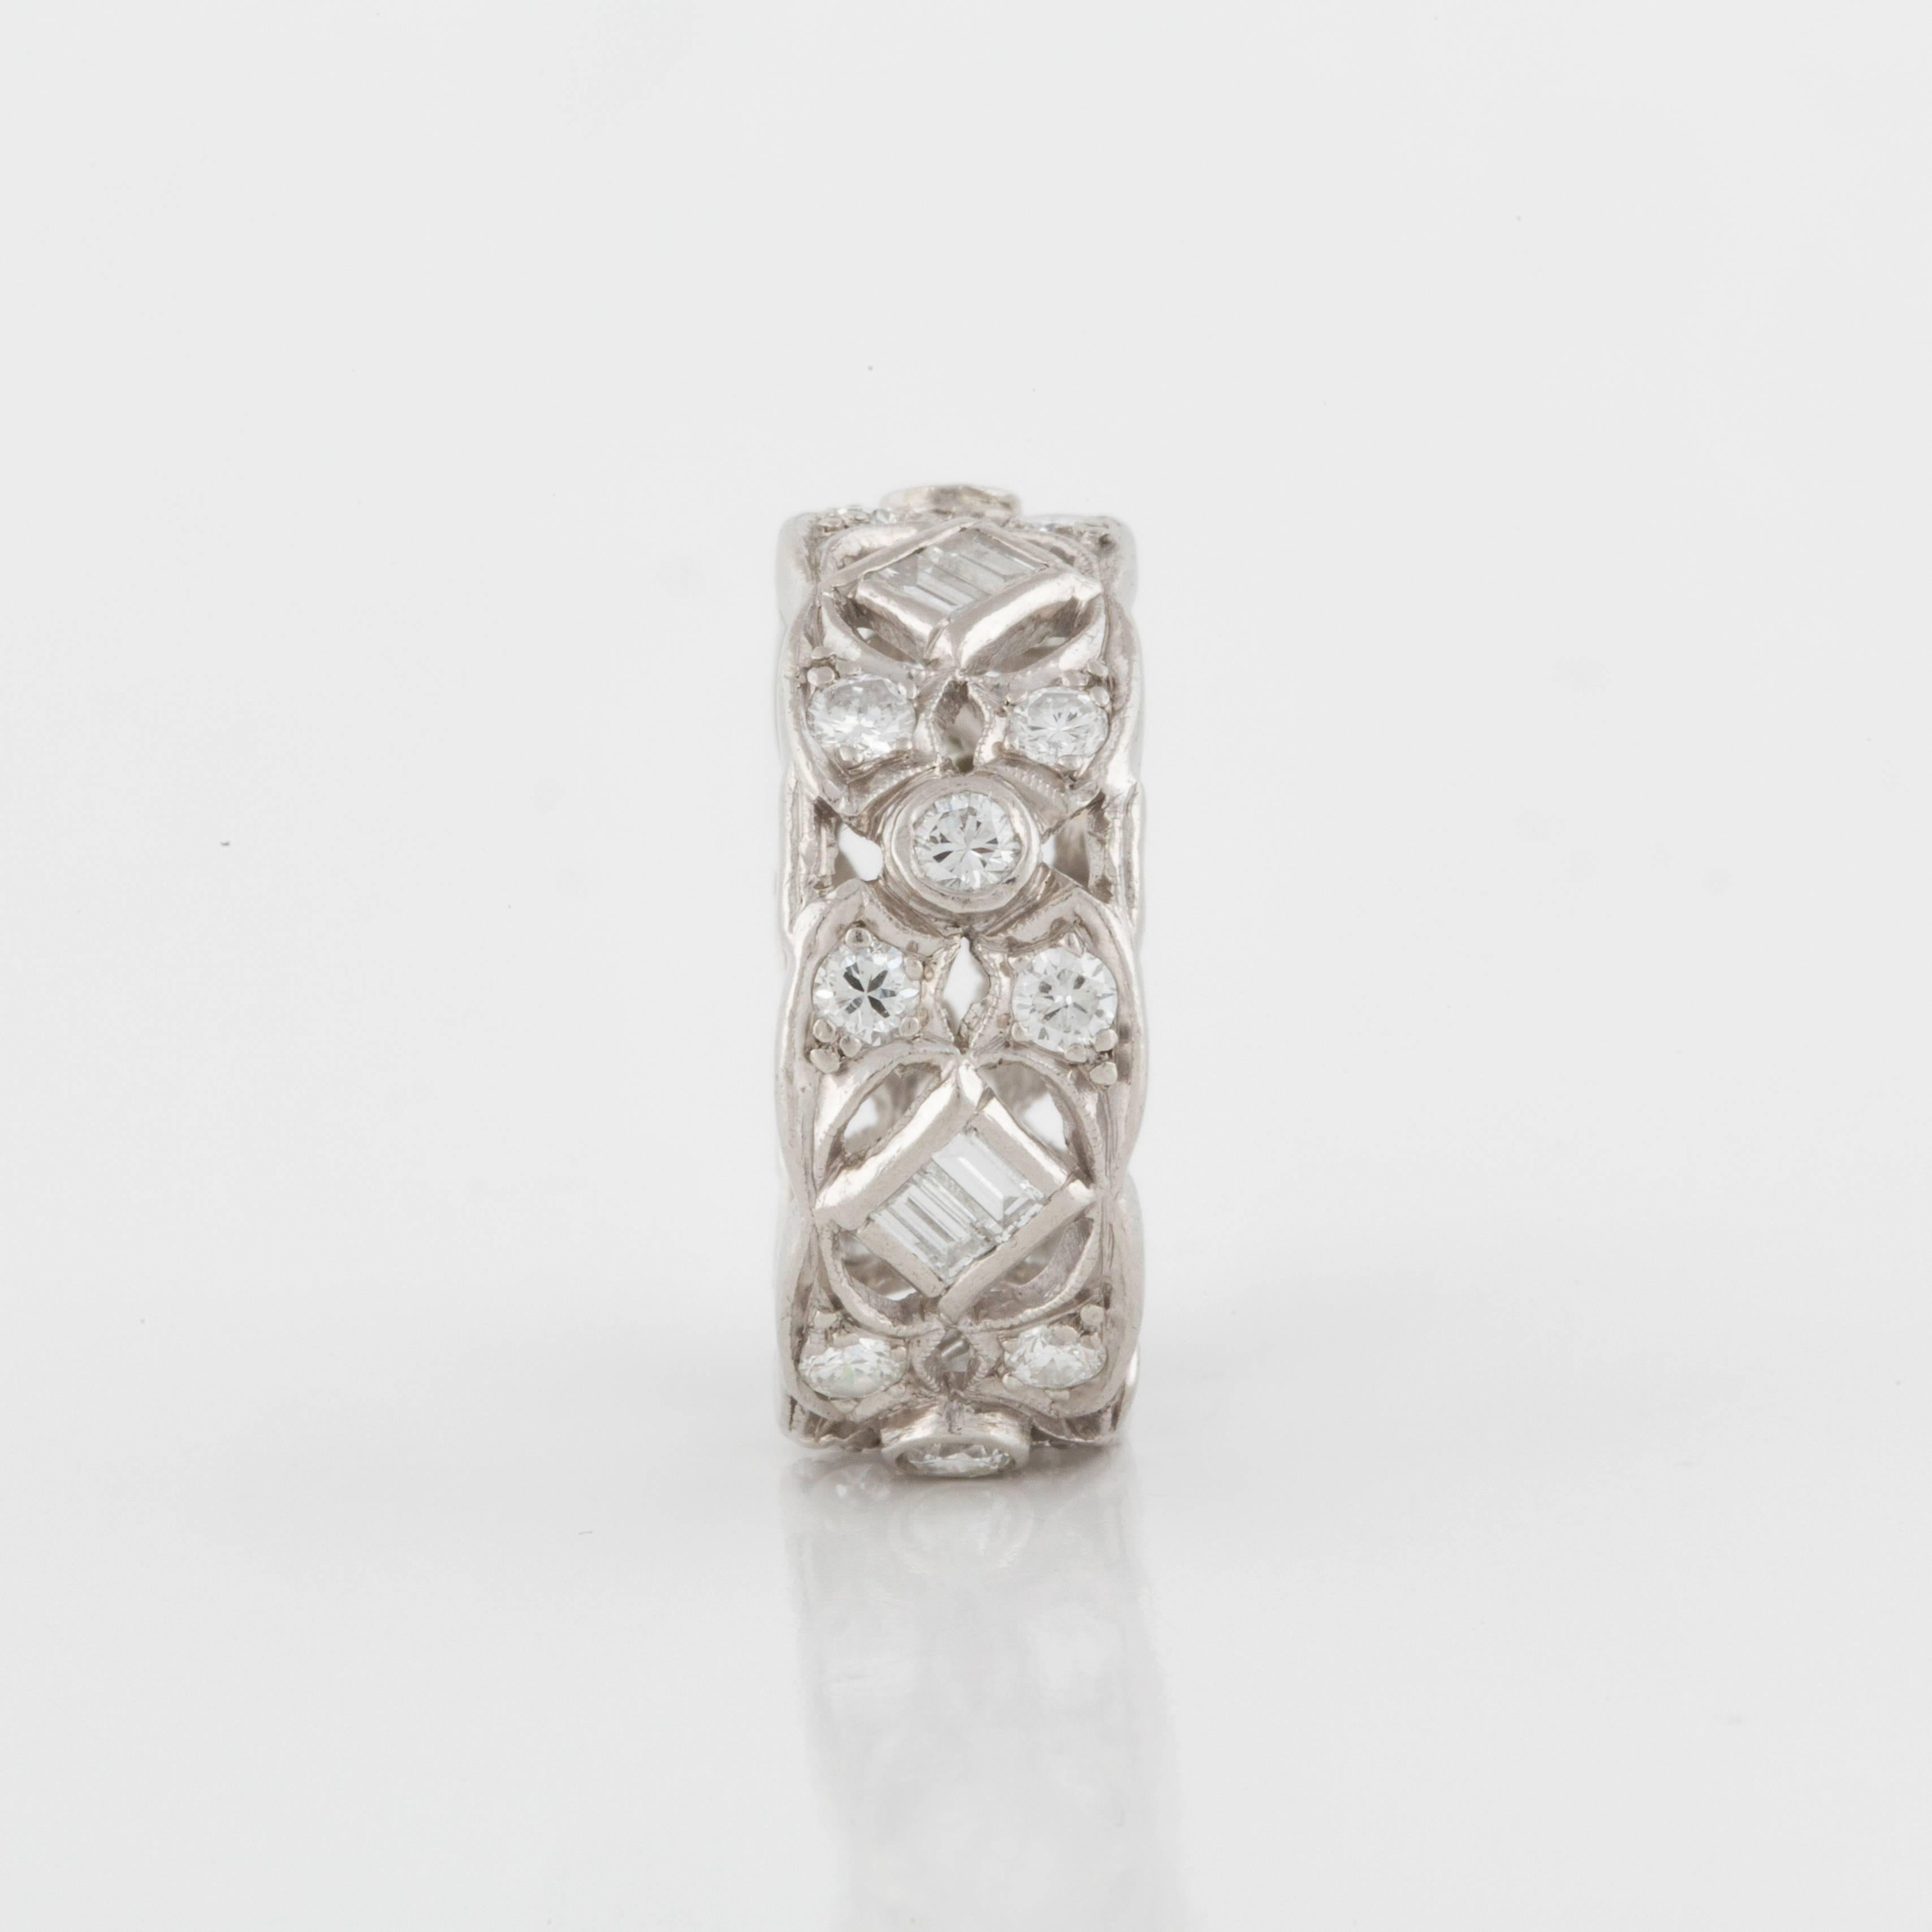 Platinum openwork diamond eternity band featuring baguette and round diamonds.  There are eight baguettes and twenty round diamonds totaling 1.65 carats.  Measures 5/16 inches wide and is a size 8 1/2.